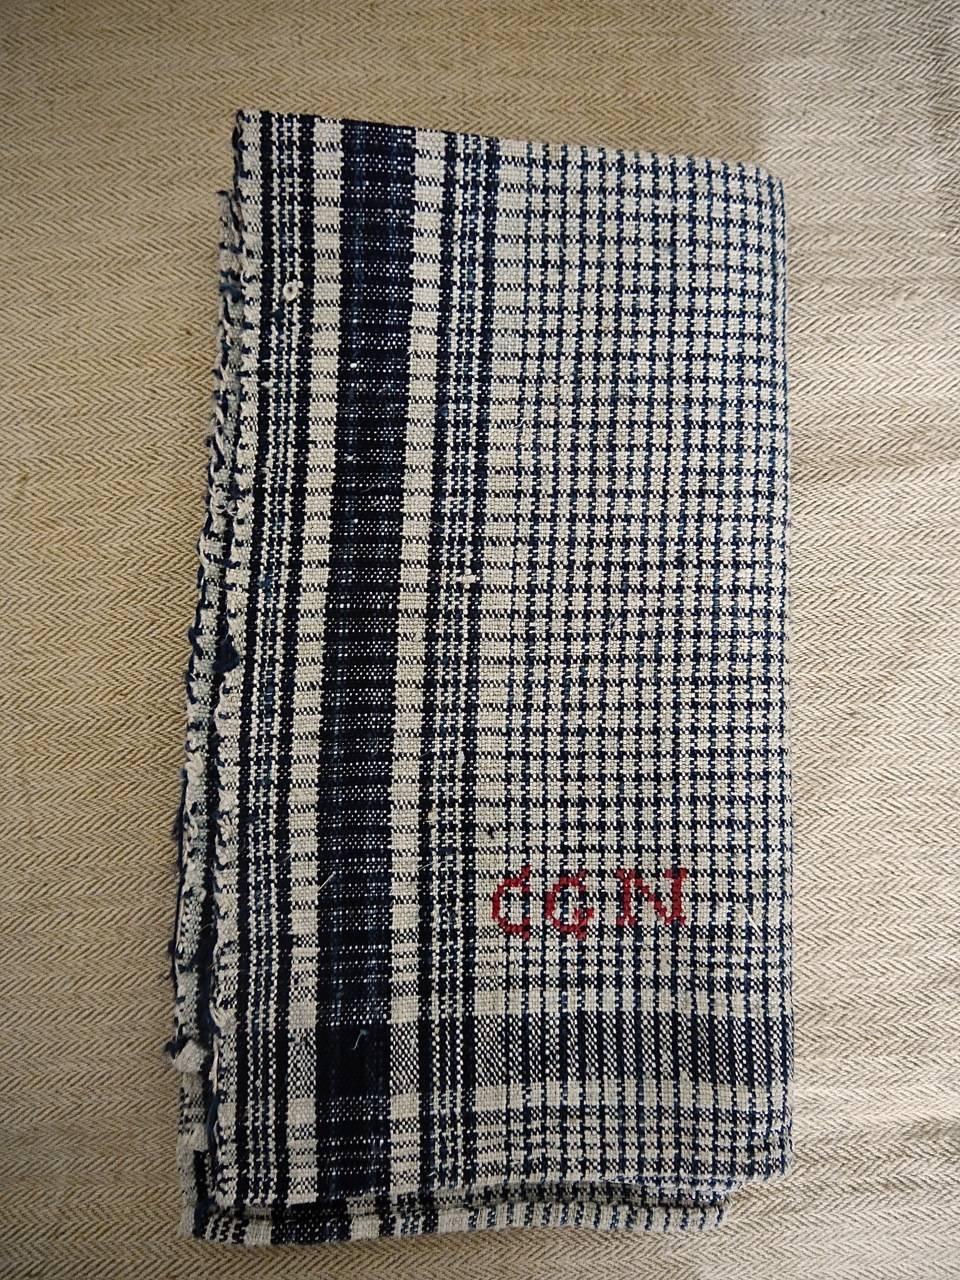 Late 19th century French indigo checked heavy linen square with a monogram CGN. Beautiful rustic piece.
Unused.